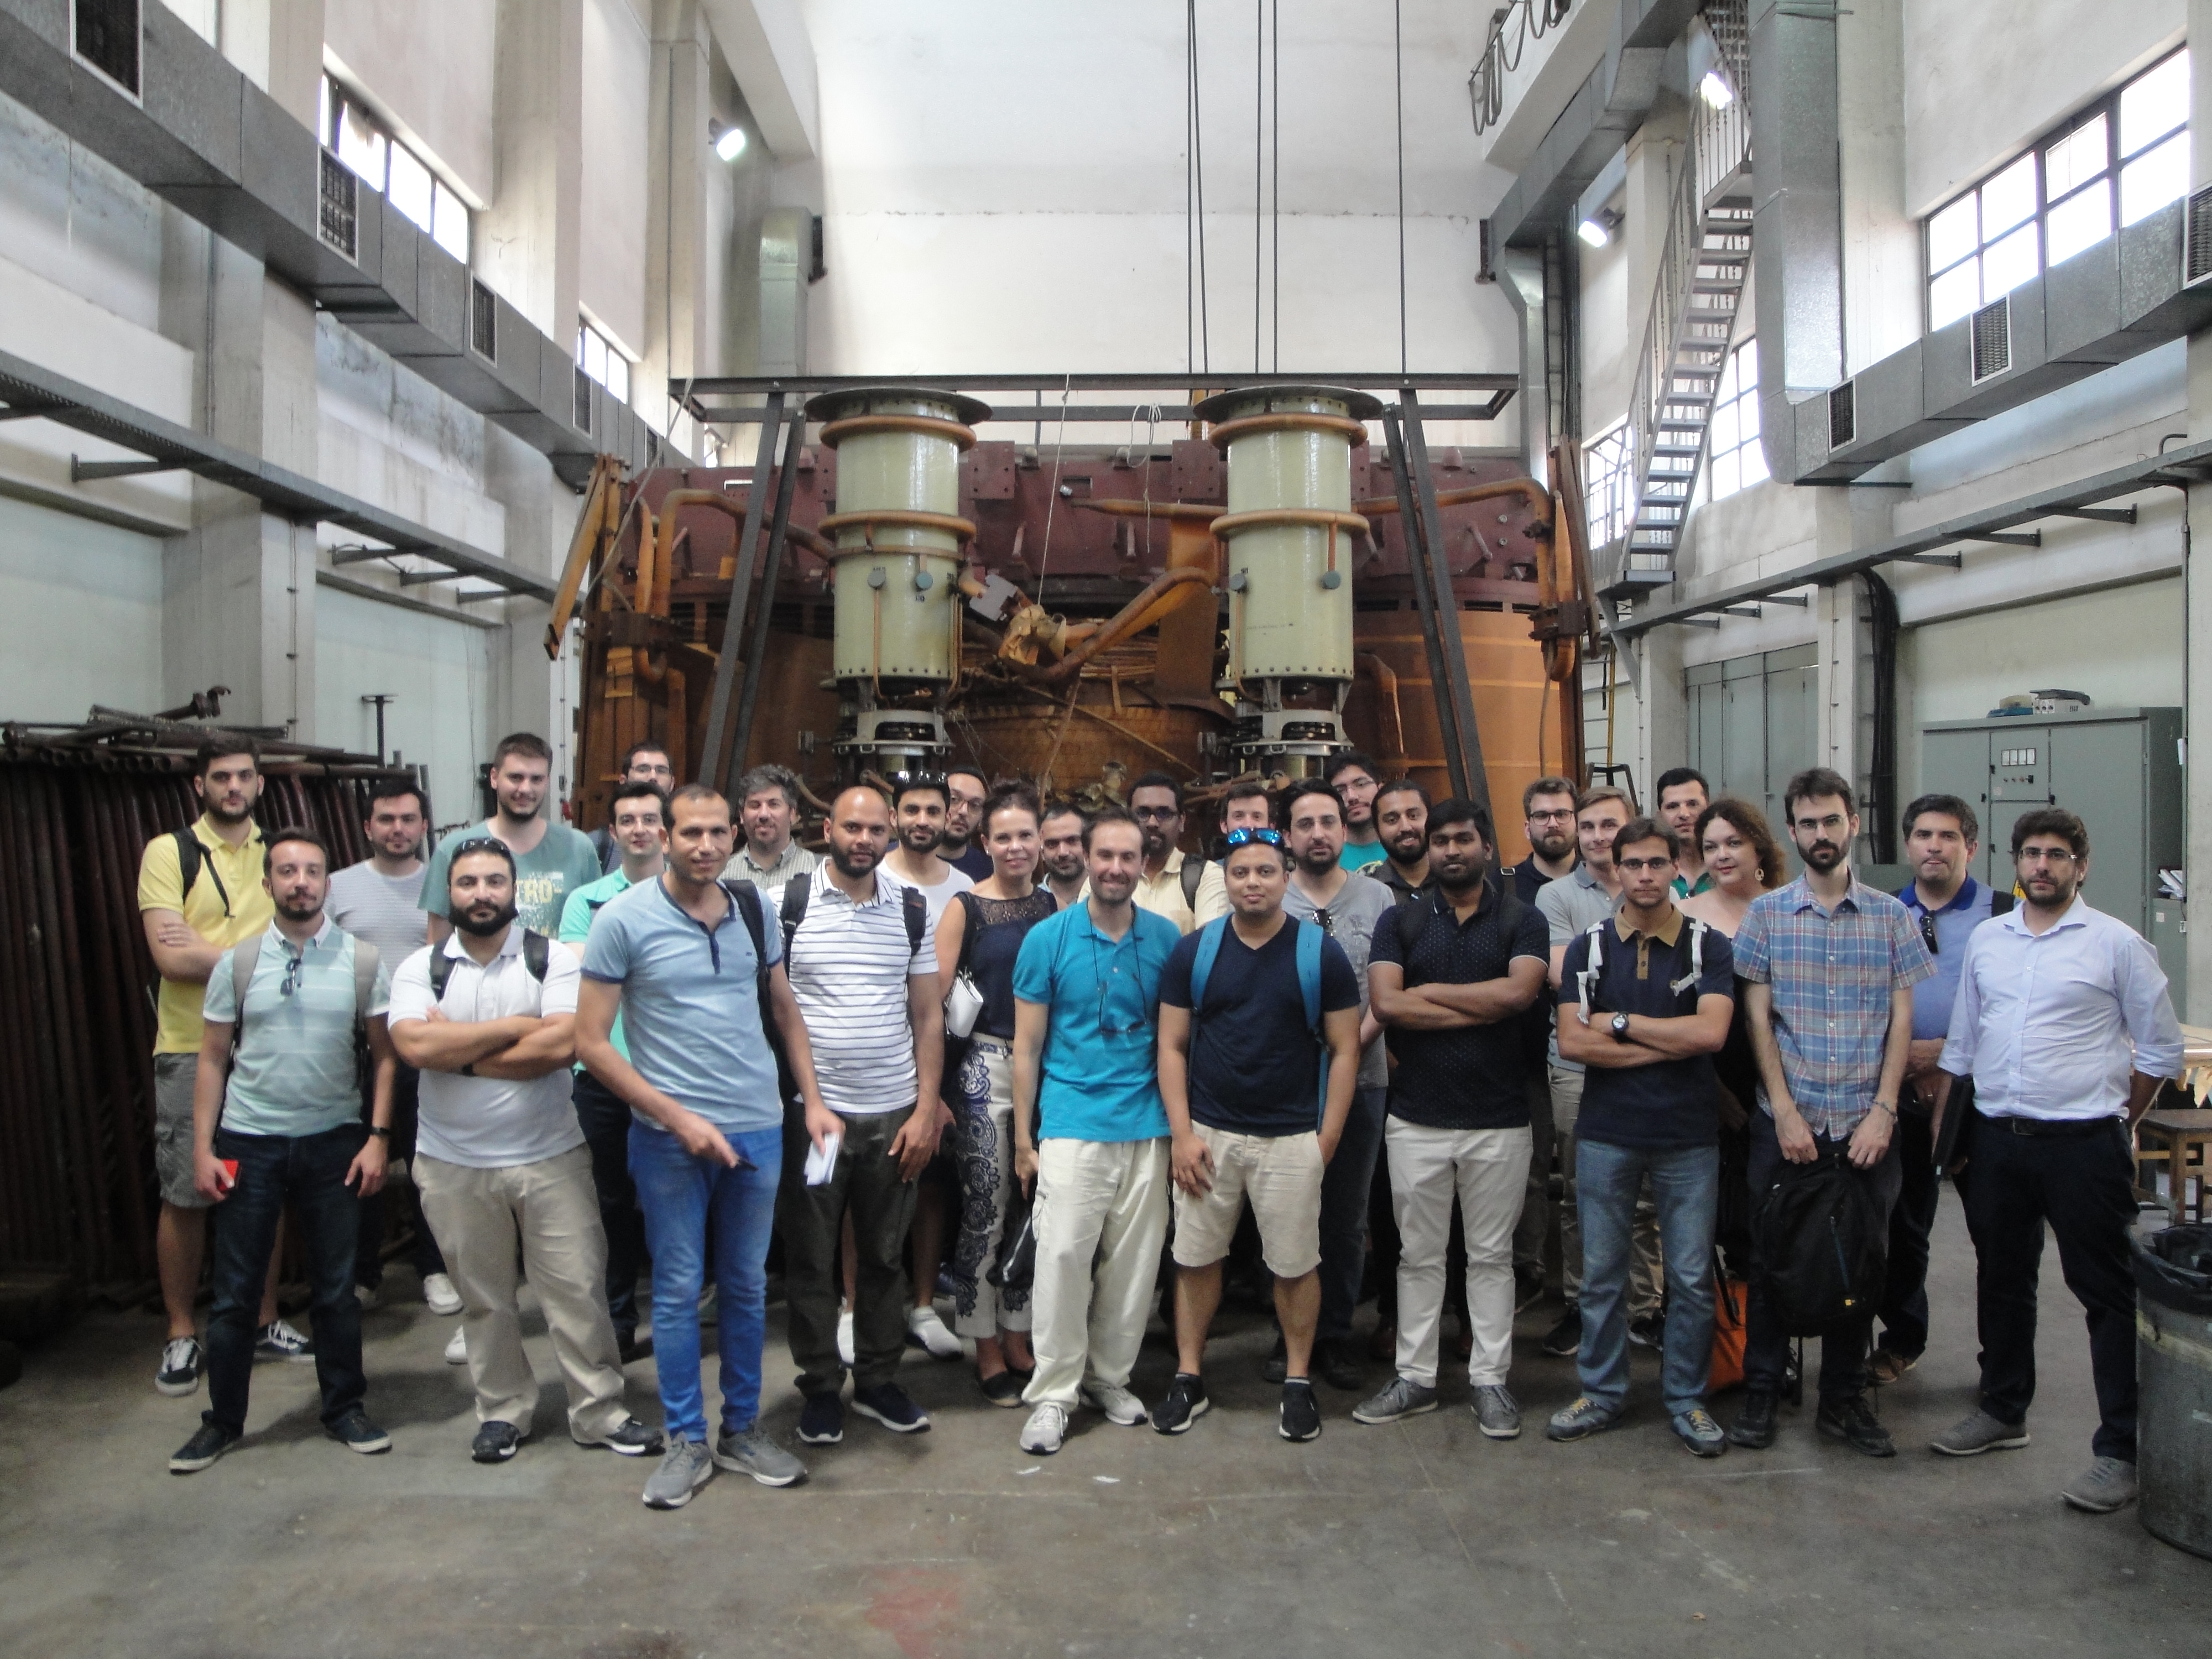 Successful ERIGrid Summer School “Advanced operation and control of active distribution networks”